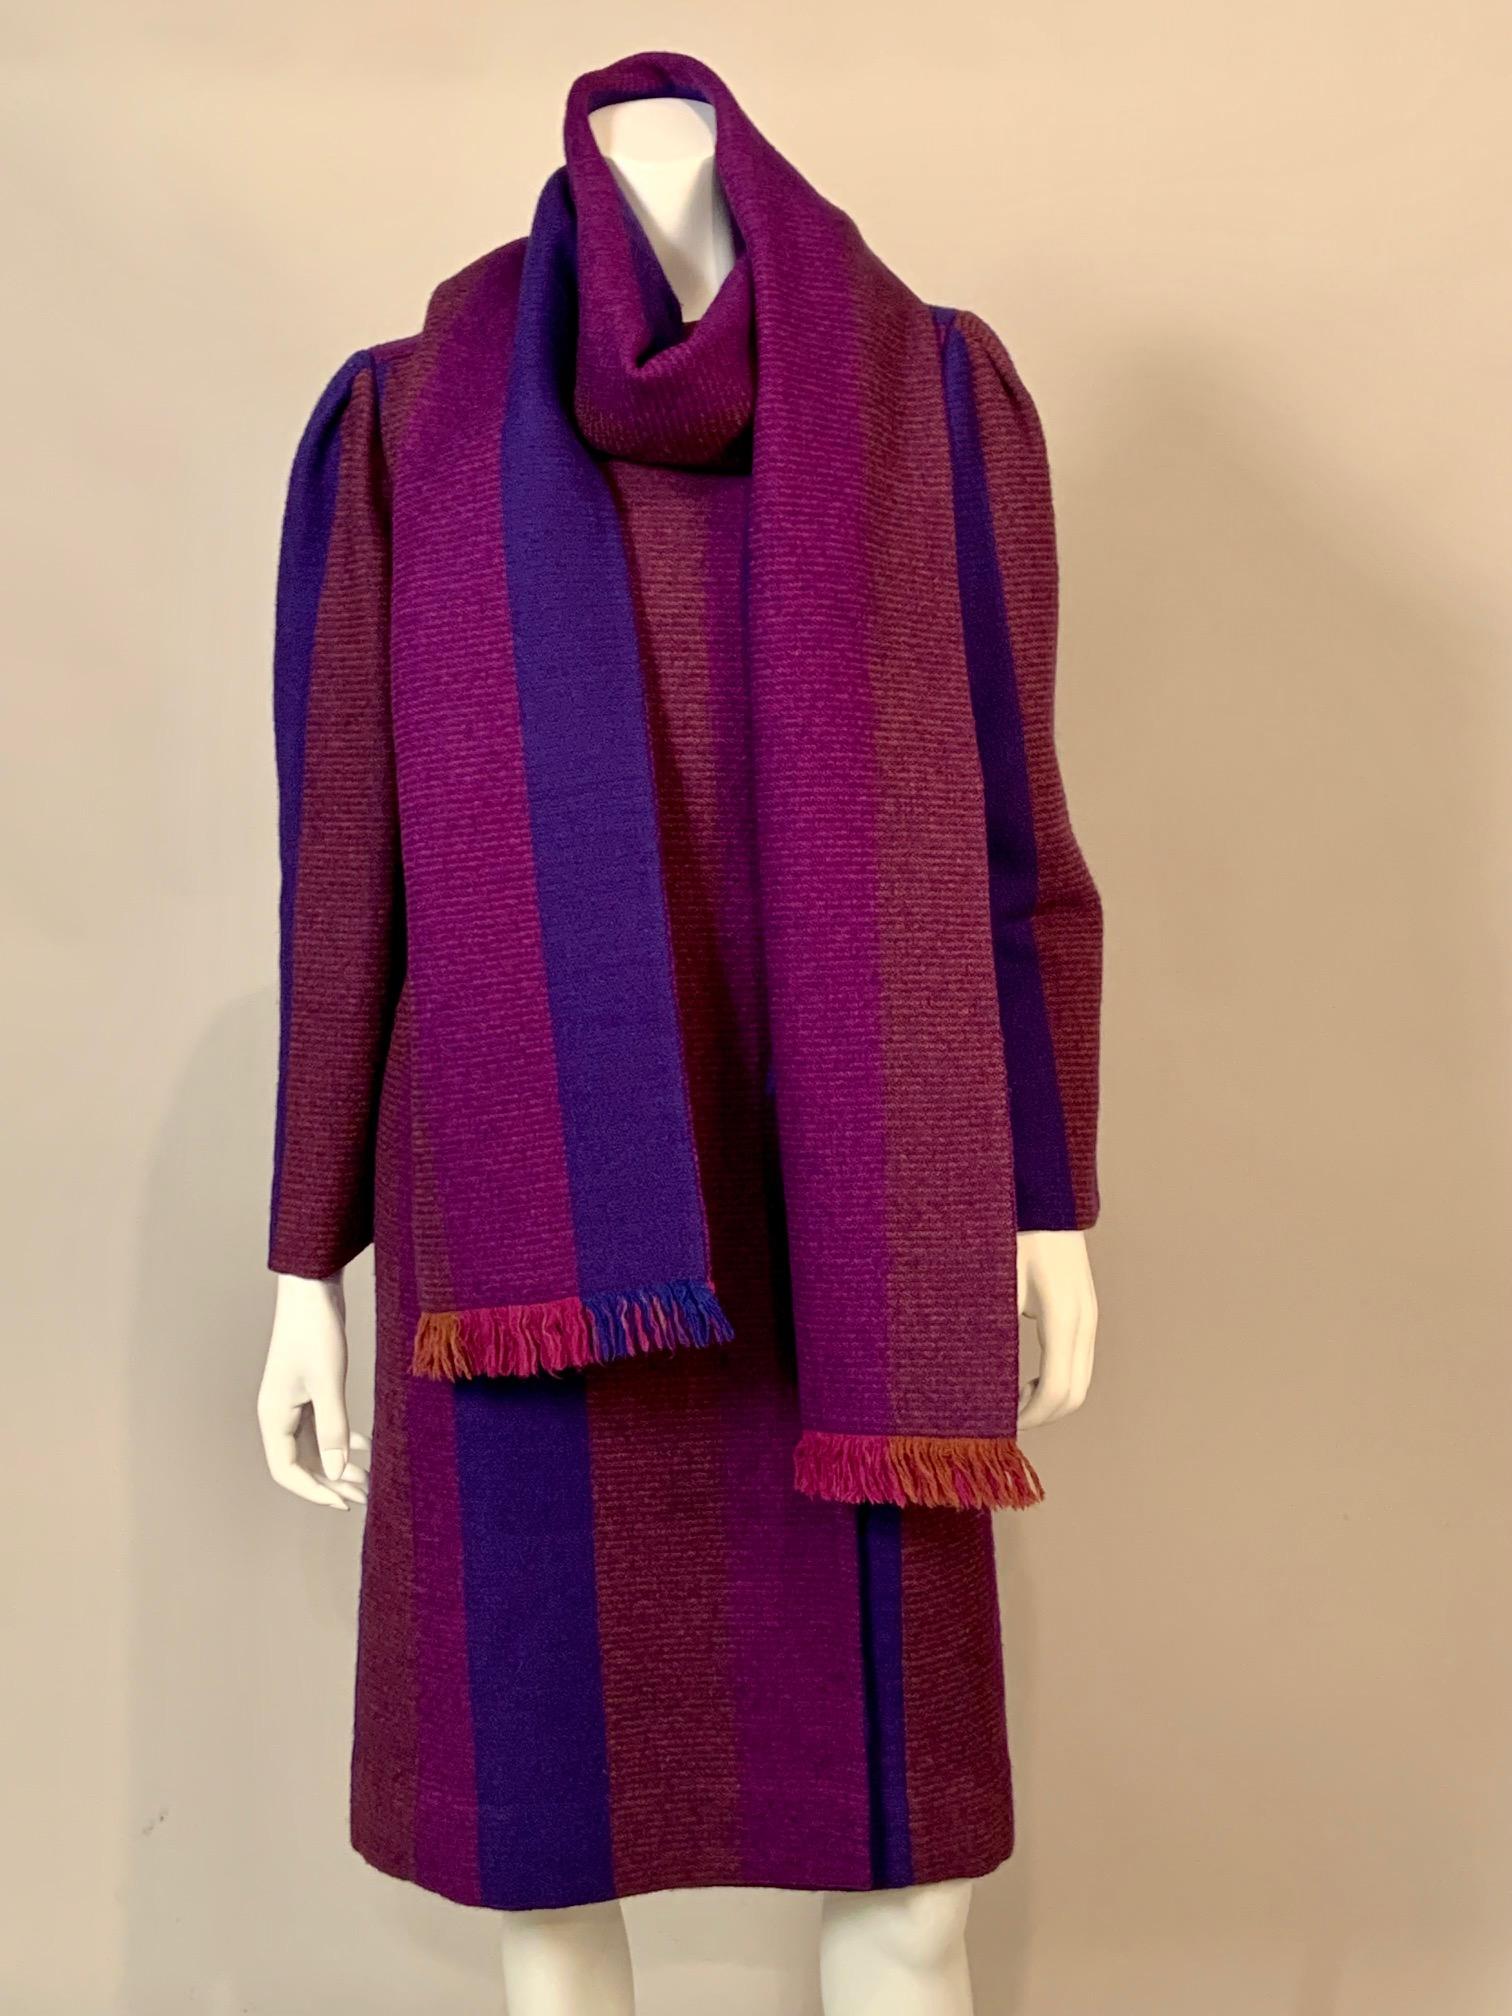 Pauline Trigere Multi Color Striped Wool Coat, Skirt and Matching Shawl In Excellent Condition For Sale In New Hope, PA